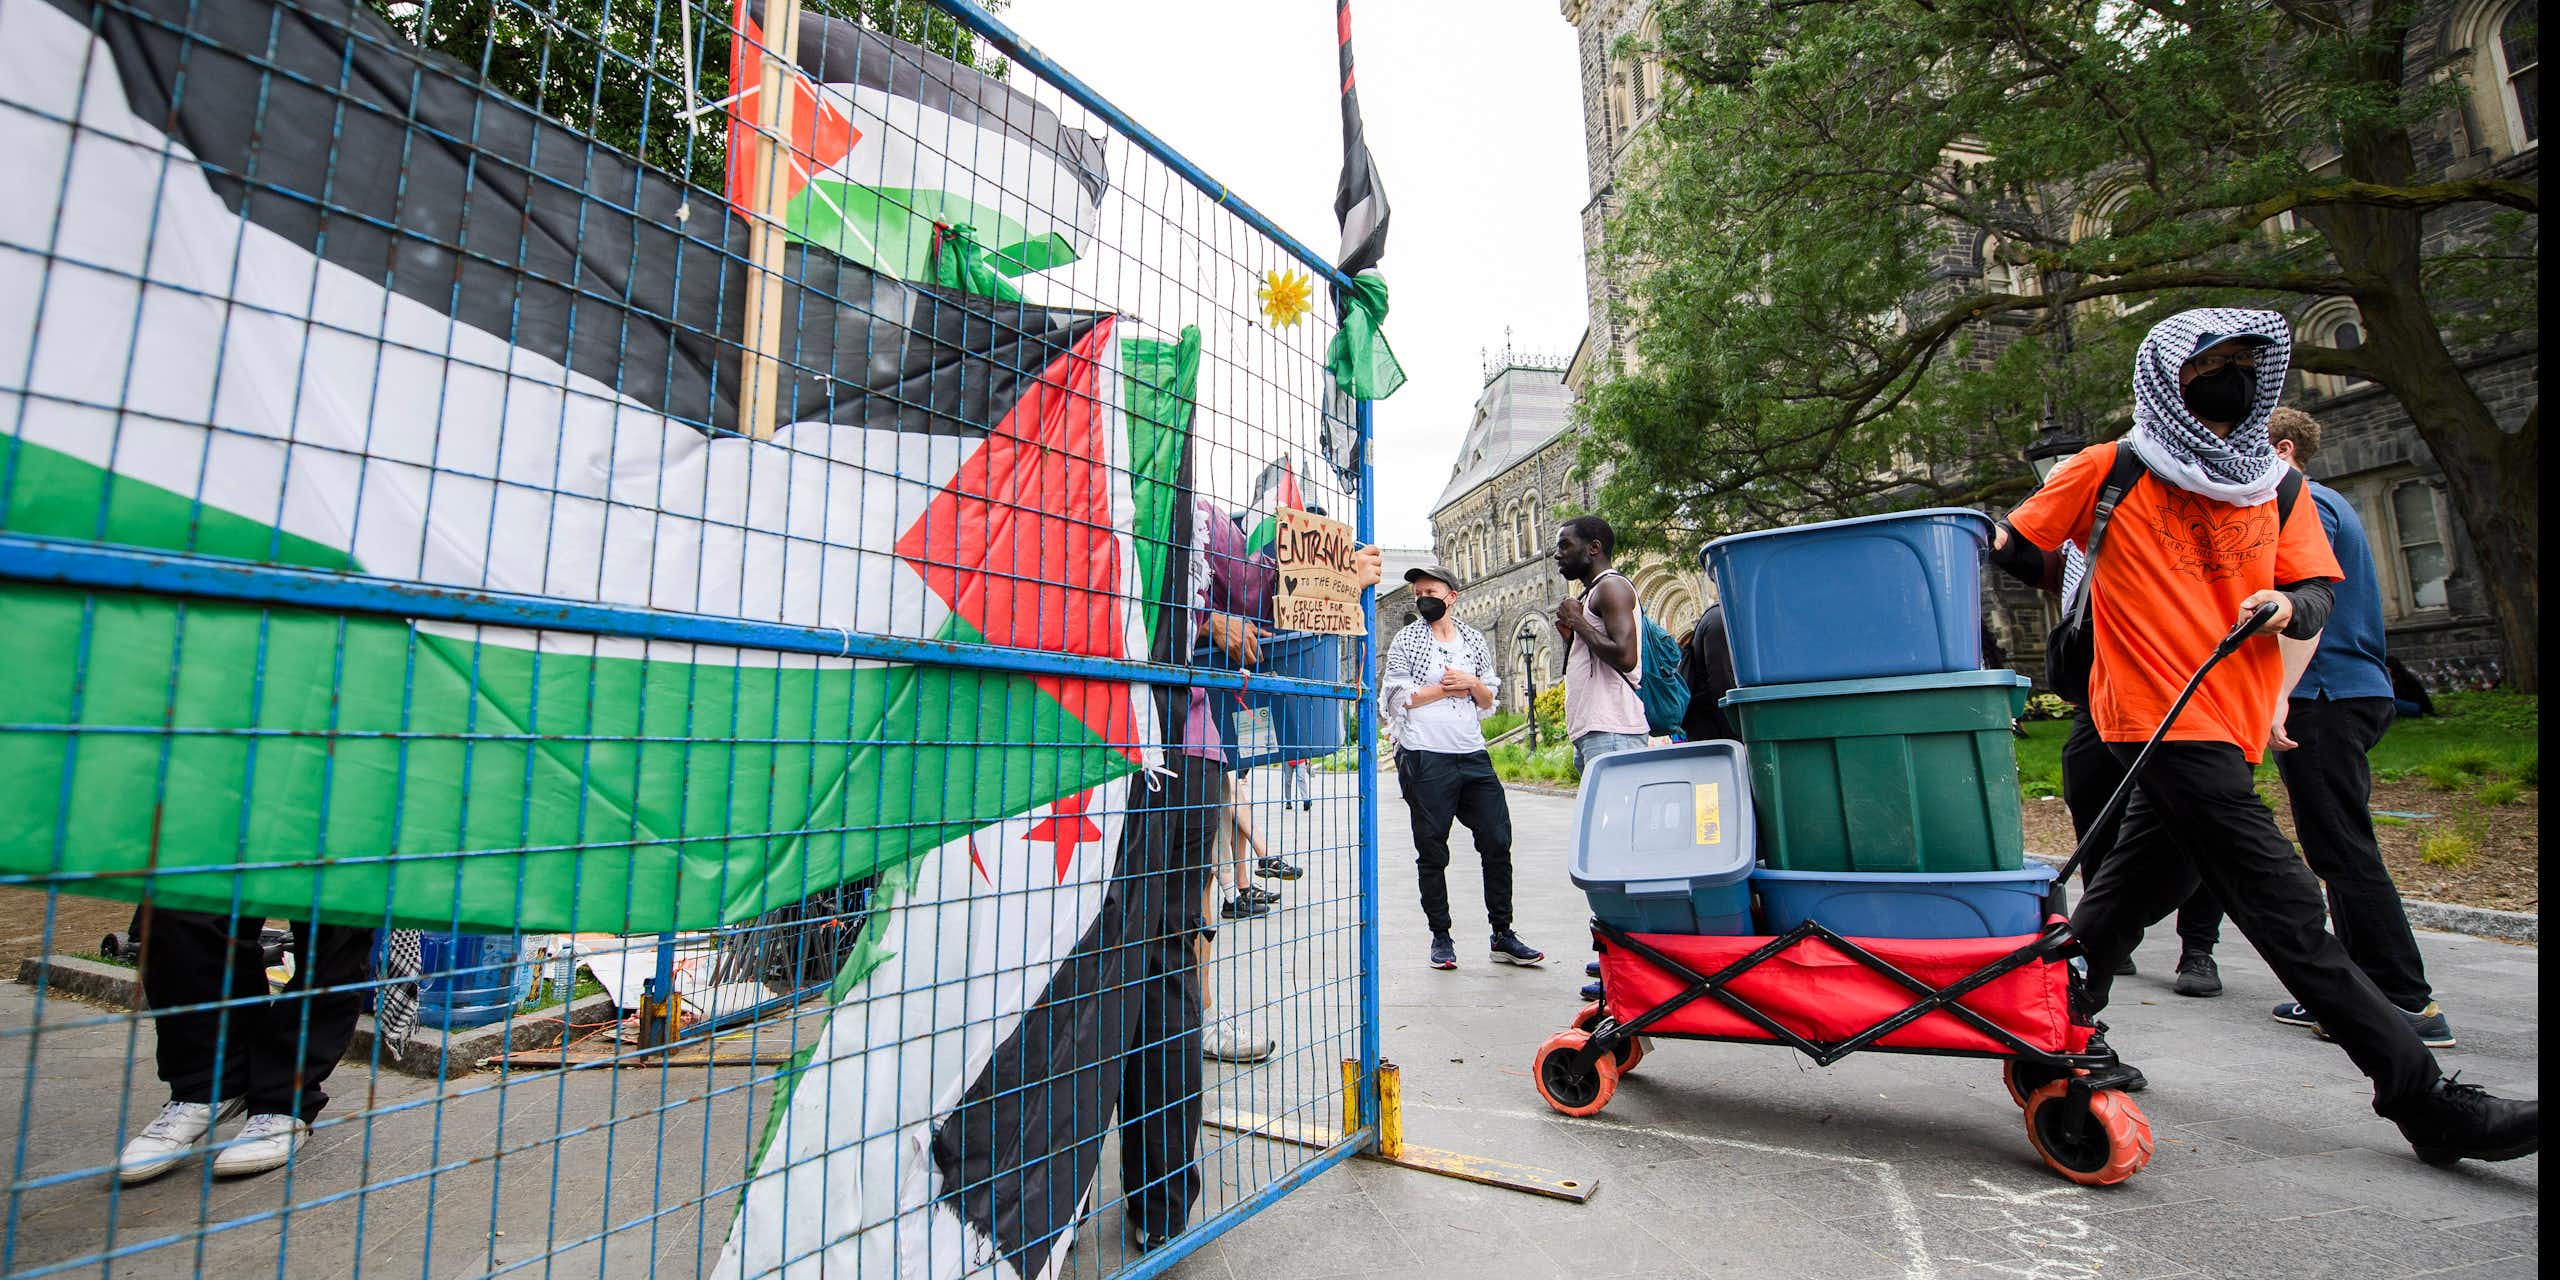 someone in an orange keffiyeh whose face is covered pulls a wagon of boxes past a Palestinian flag